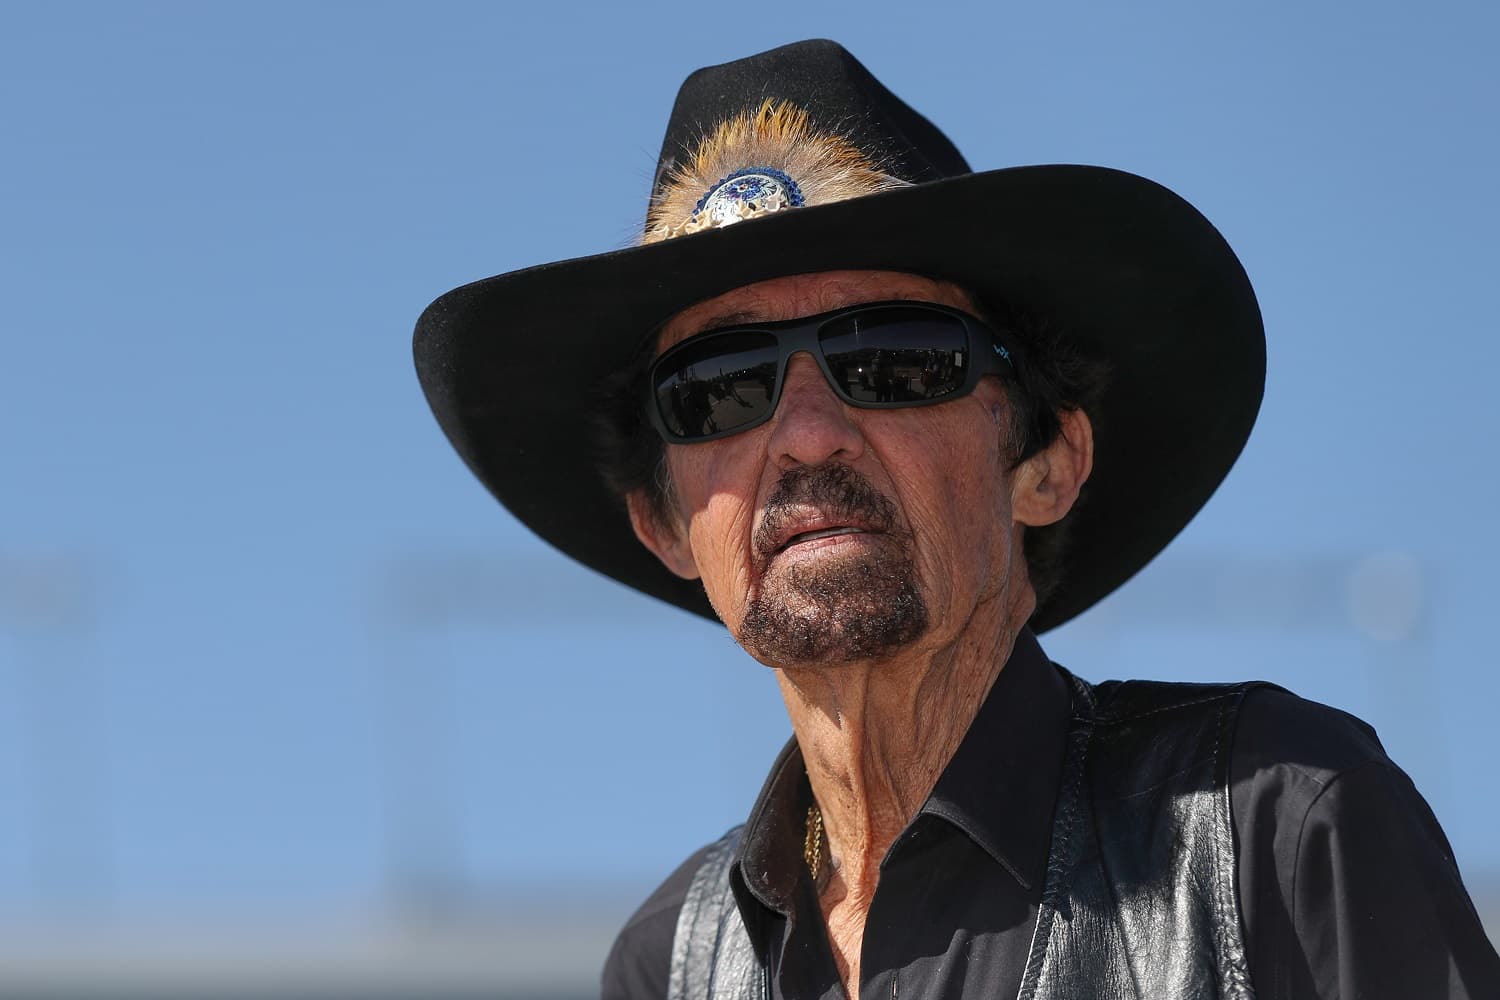 NASCAR Hall of Famer Richard Petty looks on during practice for the NASCAR Craftsman Truck Series Victoria's Voice Foundation 200 at Las Vegas Motor Speedway on March 3, 2023.